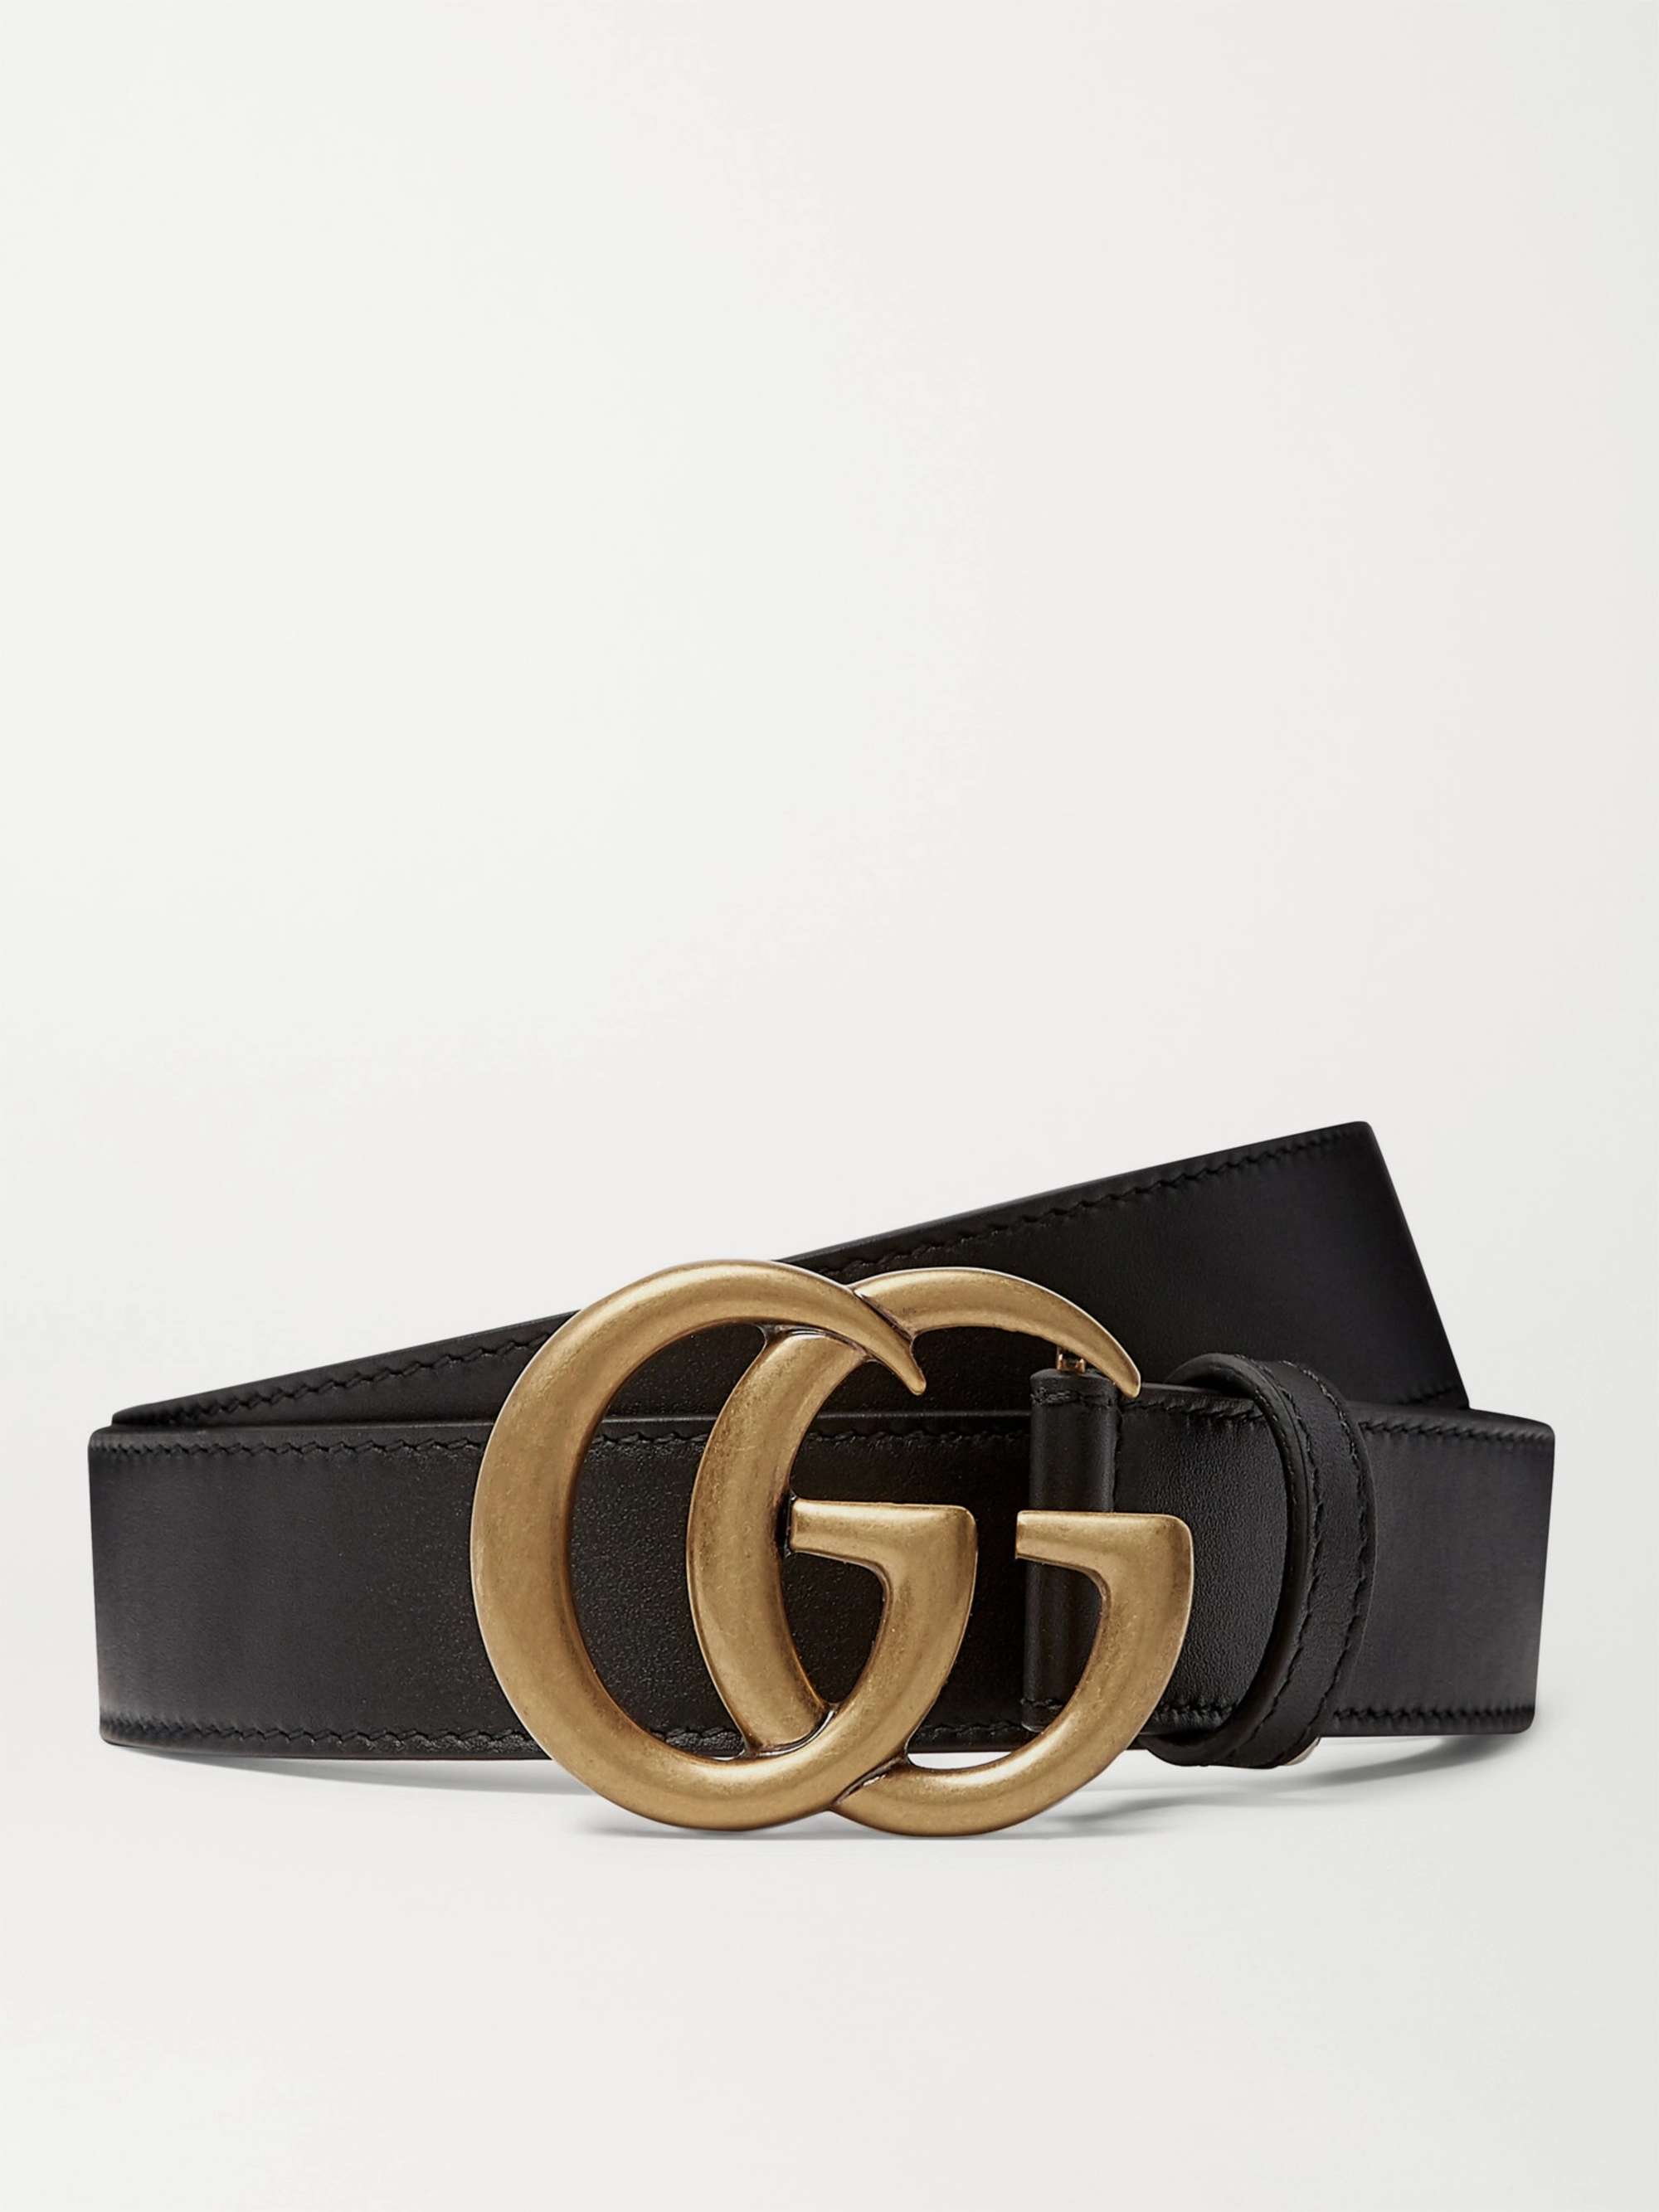 Gucci Leather-Trimmed Belt w/ Tags - Size 38